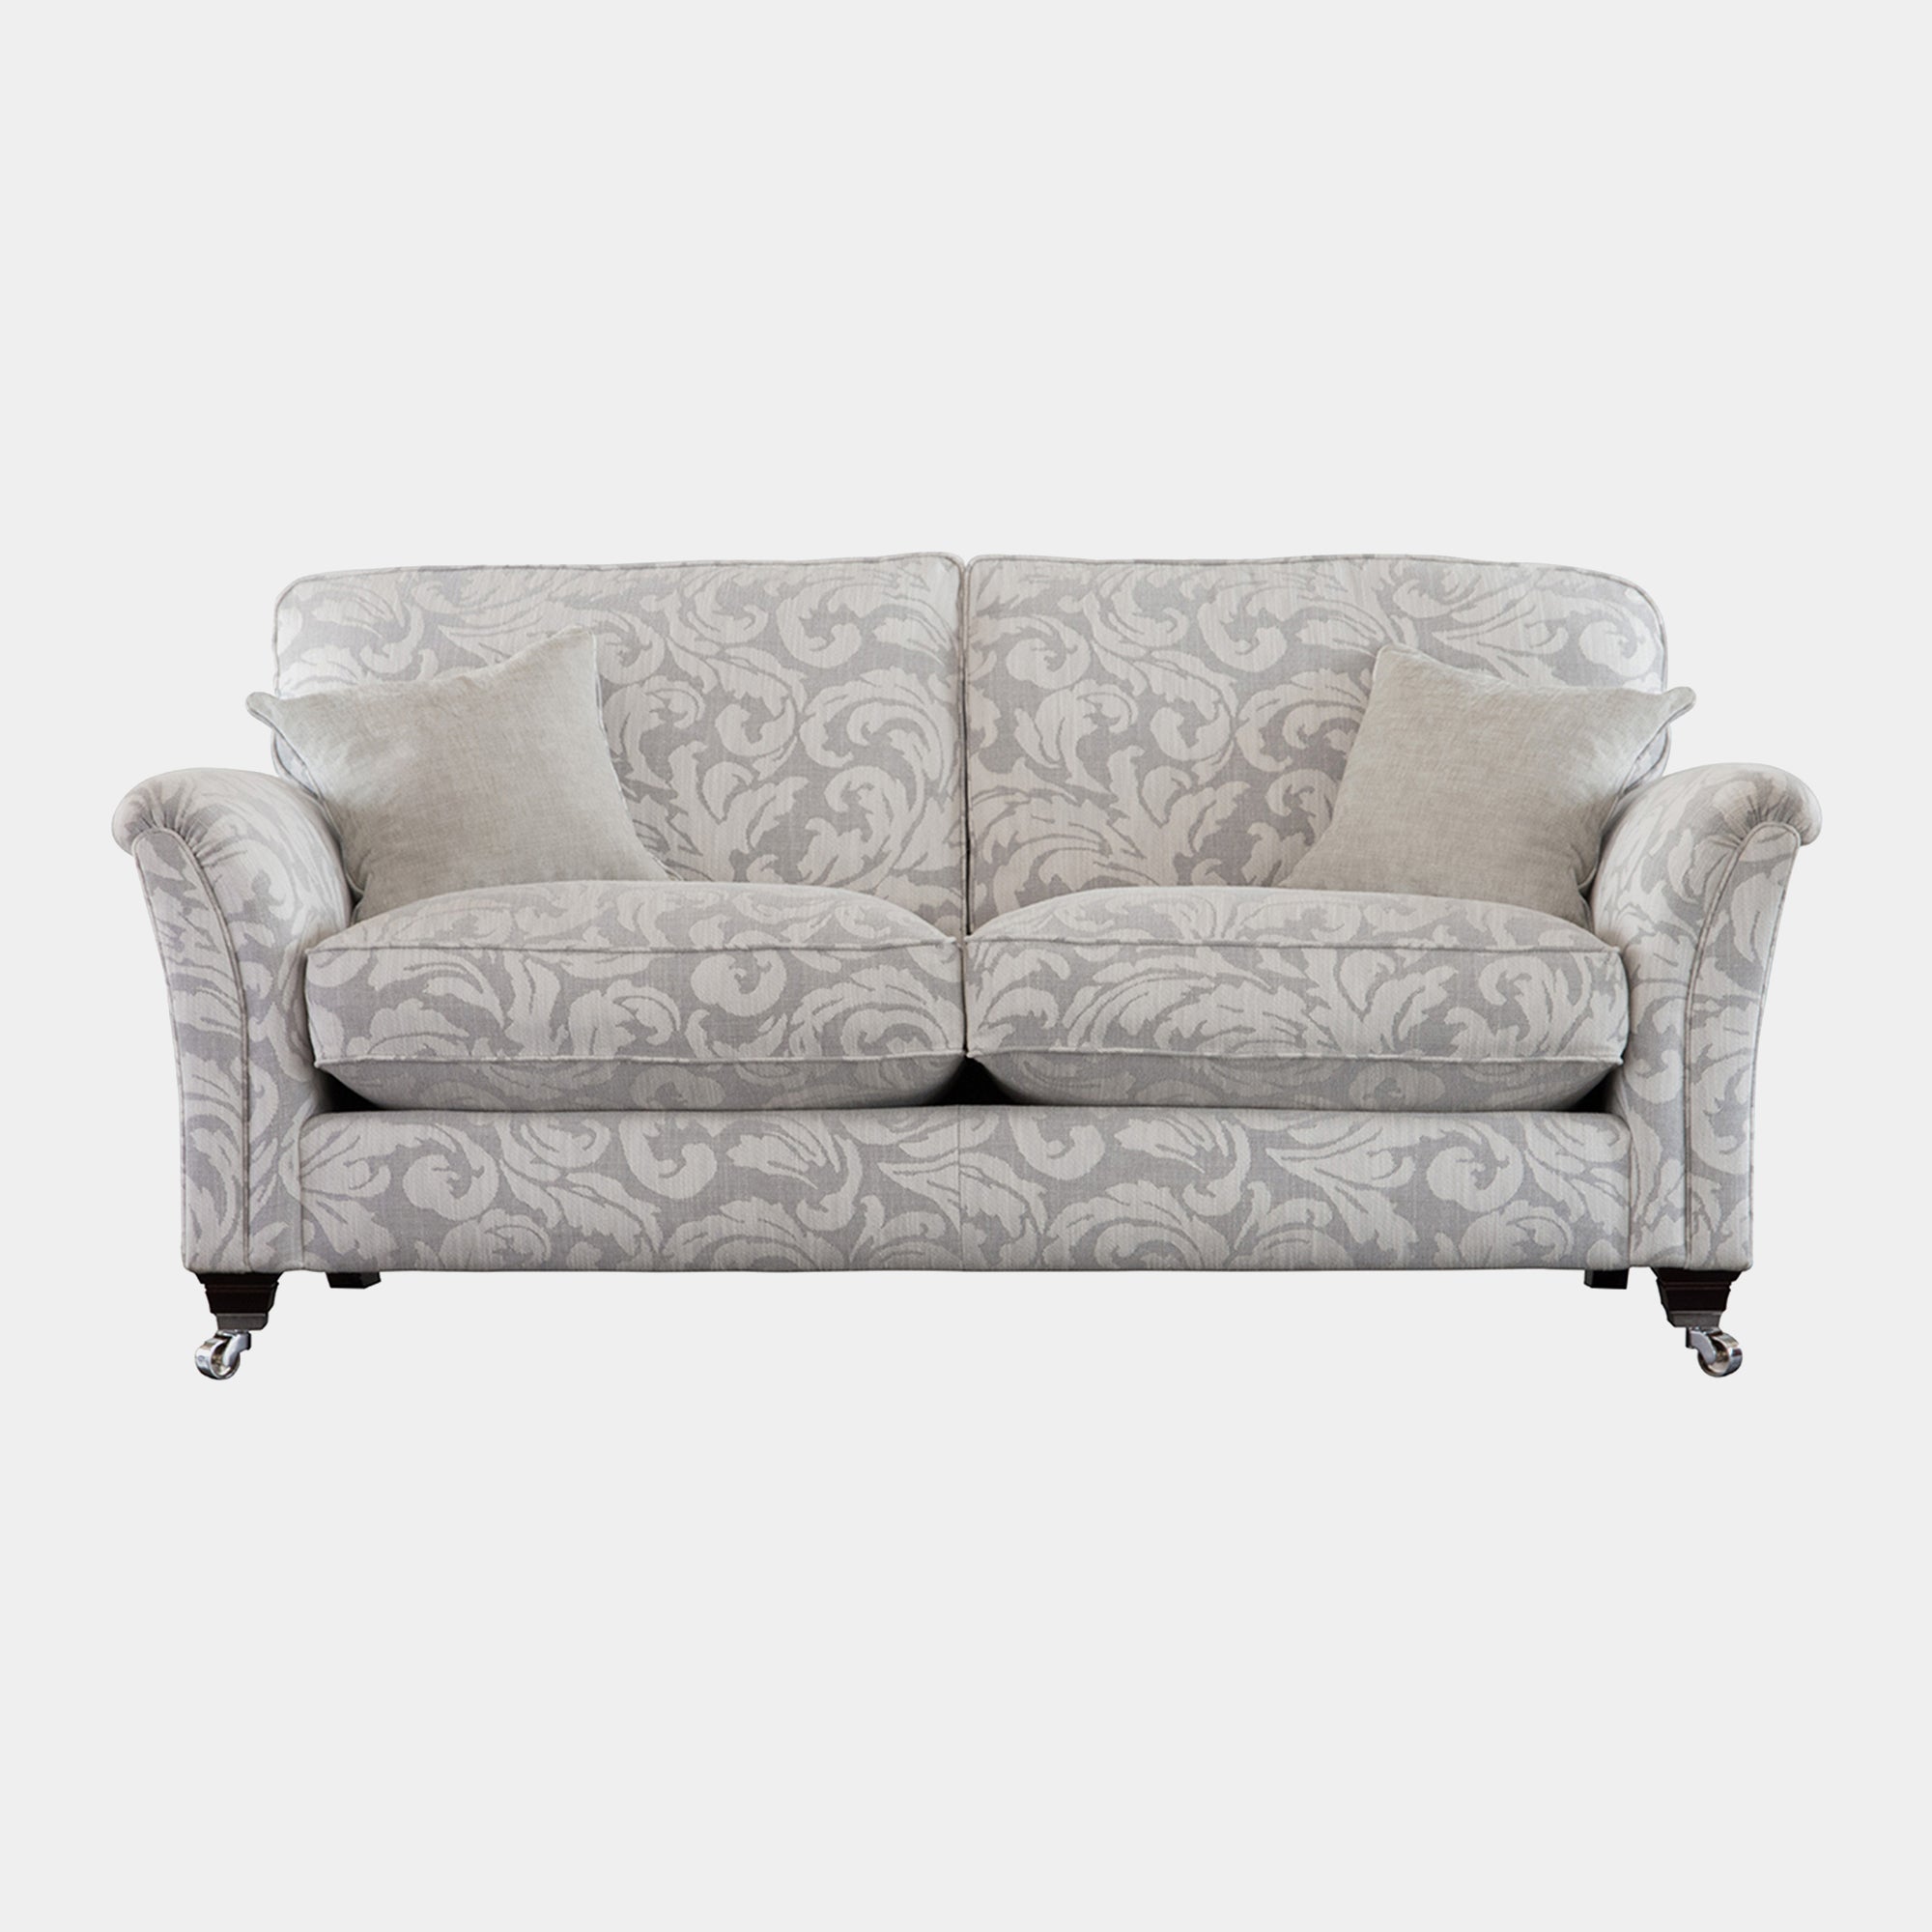 Parker Knoll Devonshire - Formal Back 2 Seat Sofa In Grade A Fabric